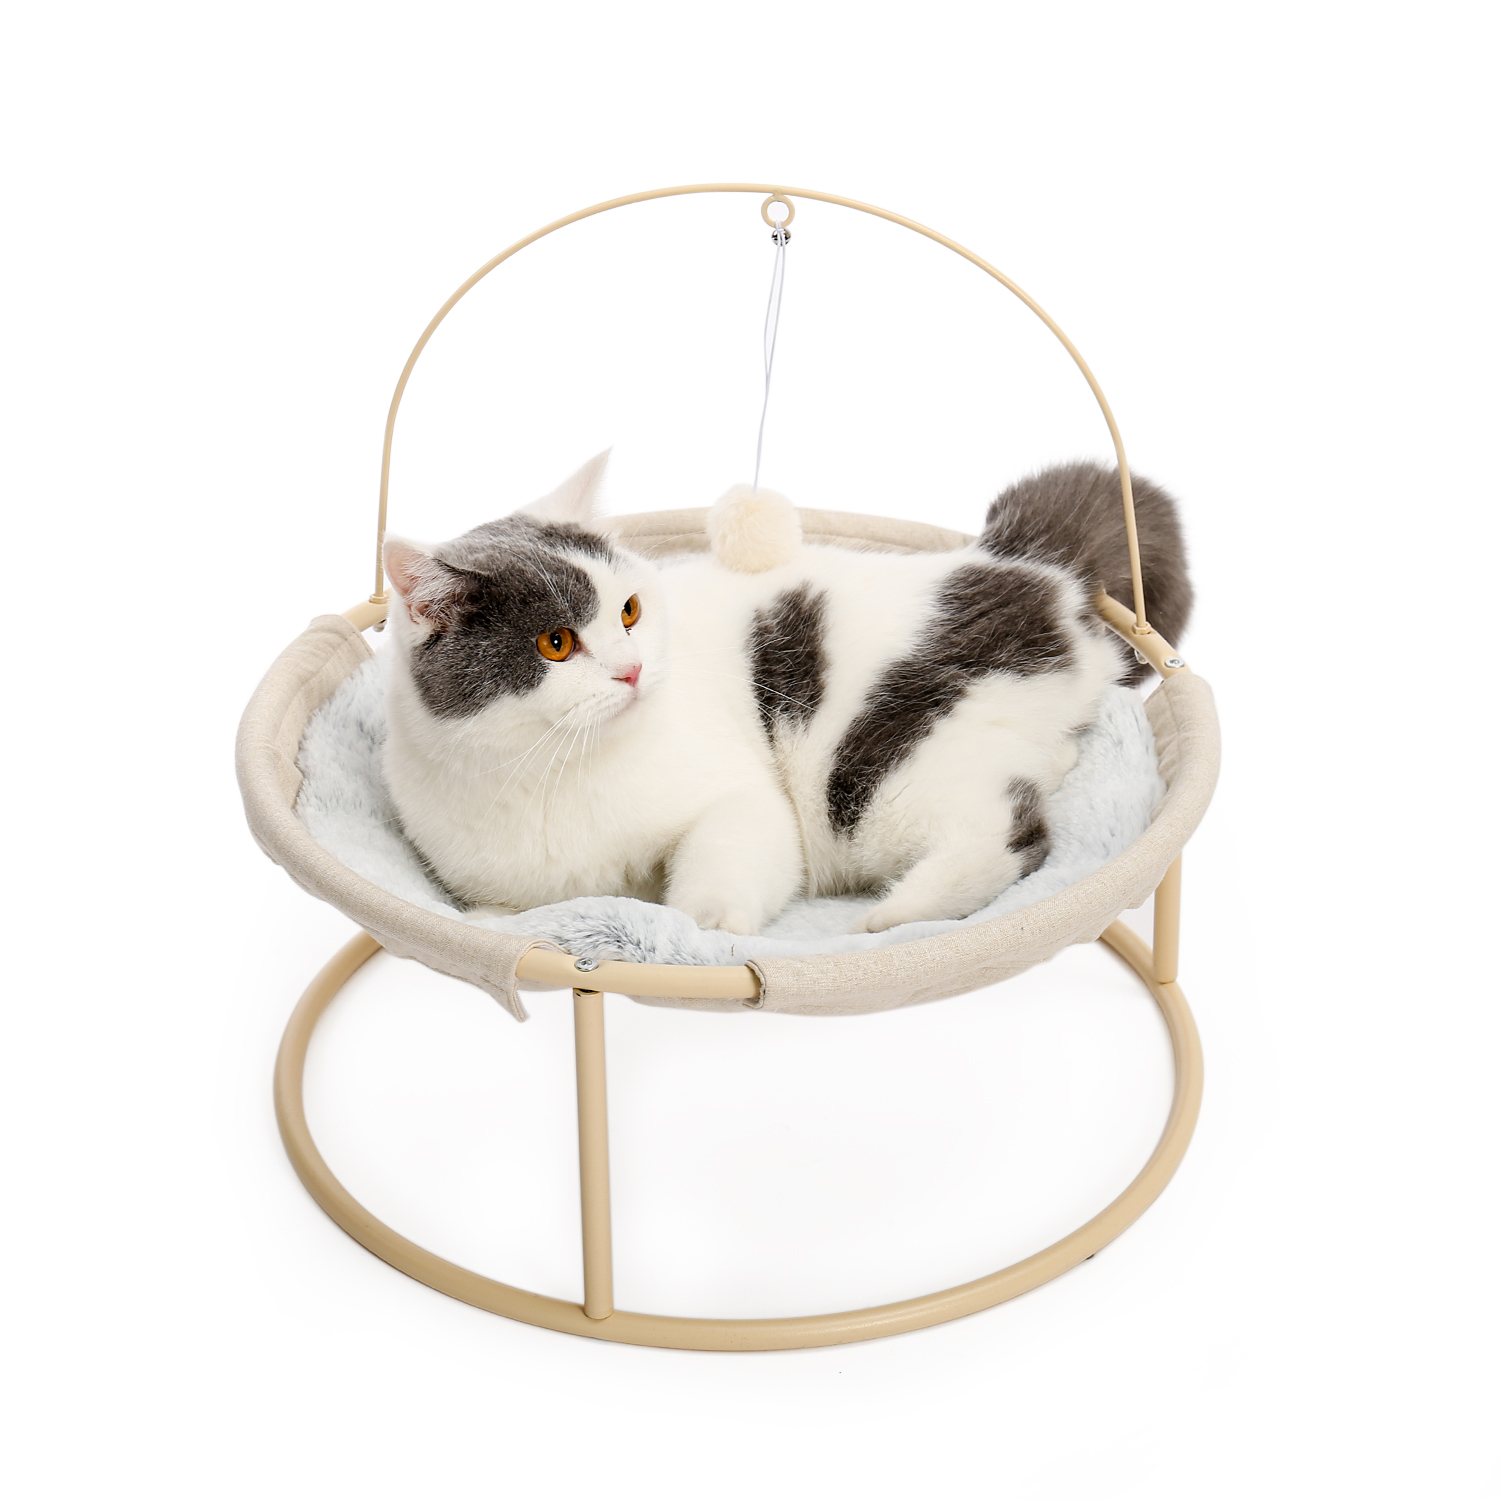 Cat Bed Soft Plush Cat Hammock Detachable Pet Bed with Dangling Ball for Cats, Small Dogs-Beige-Boyel Living